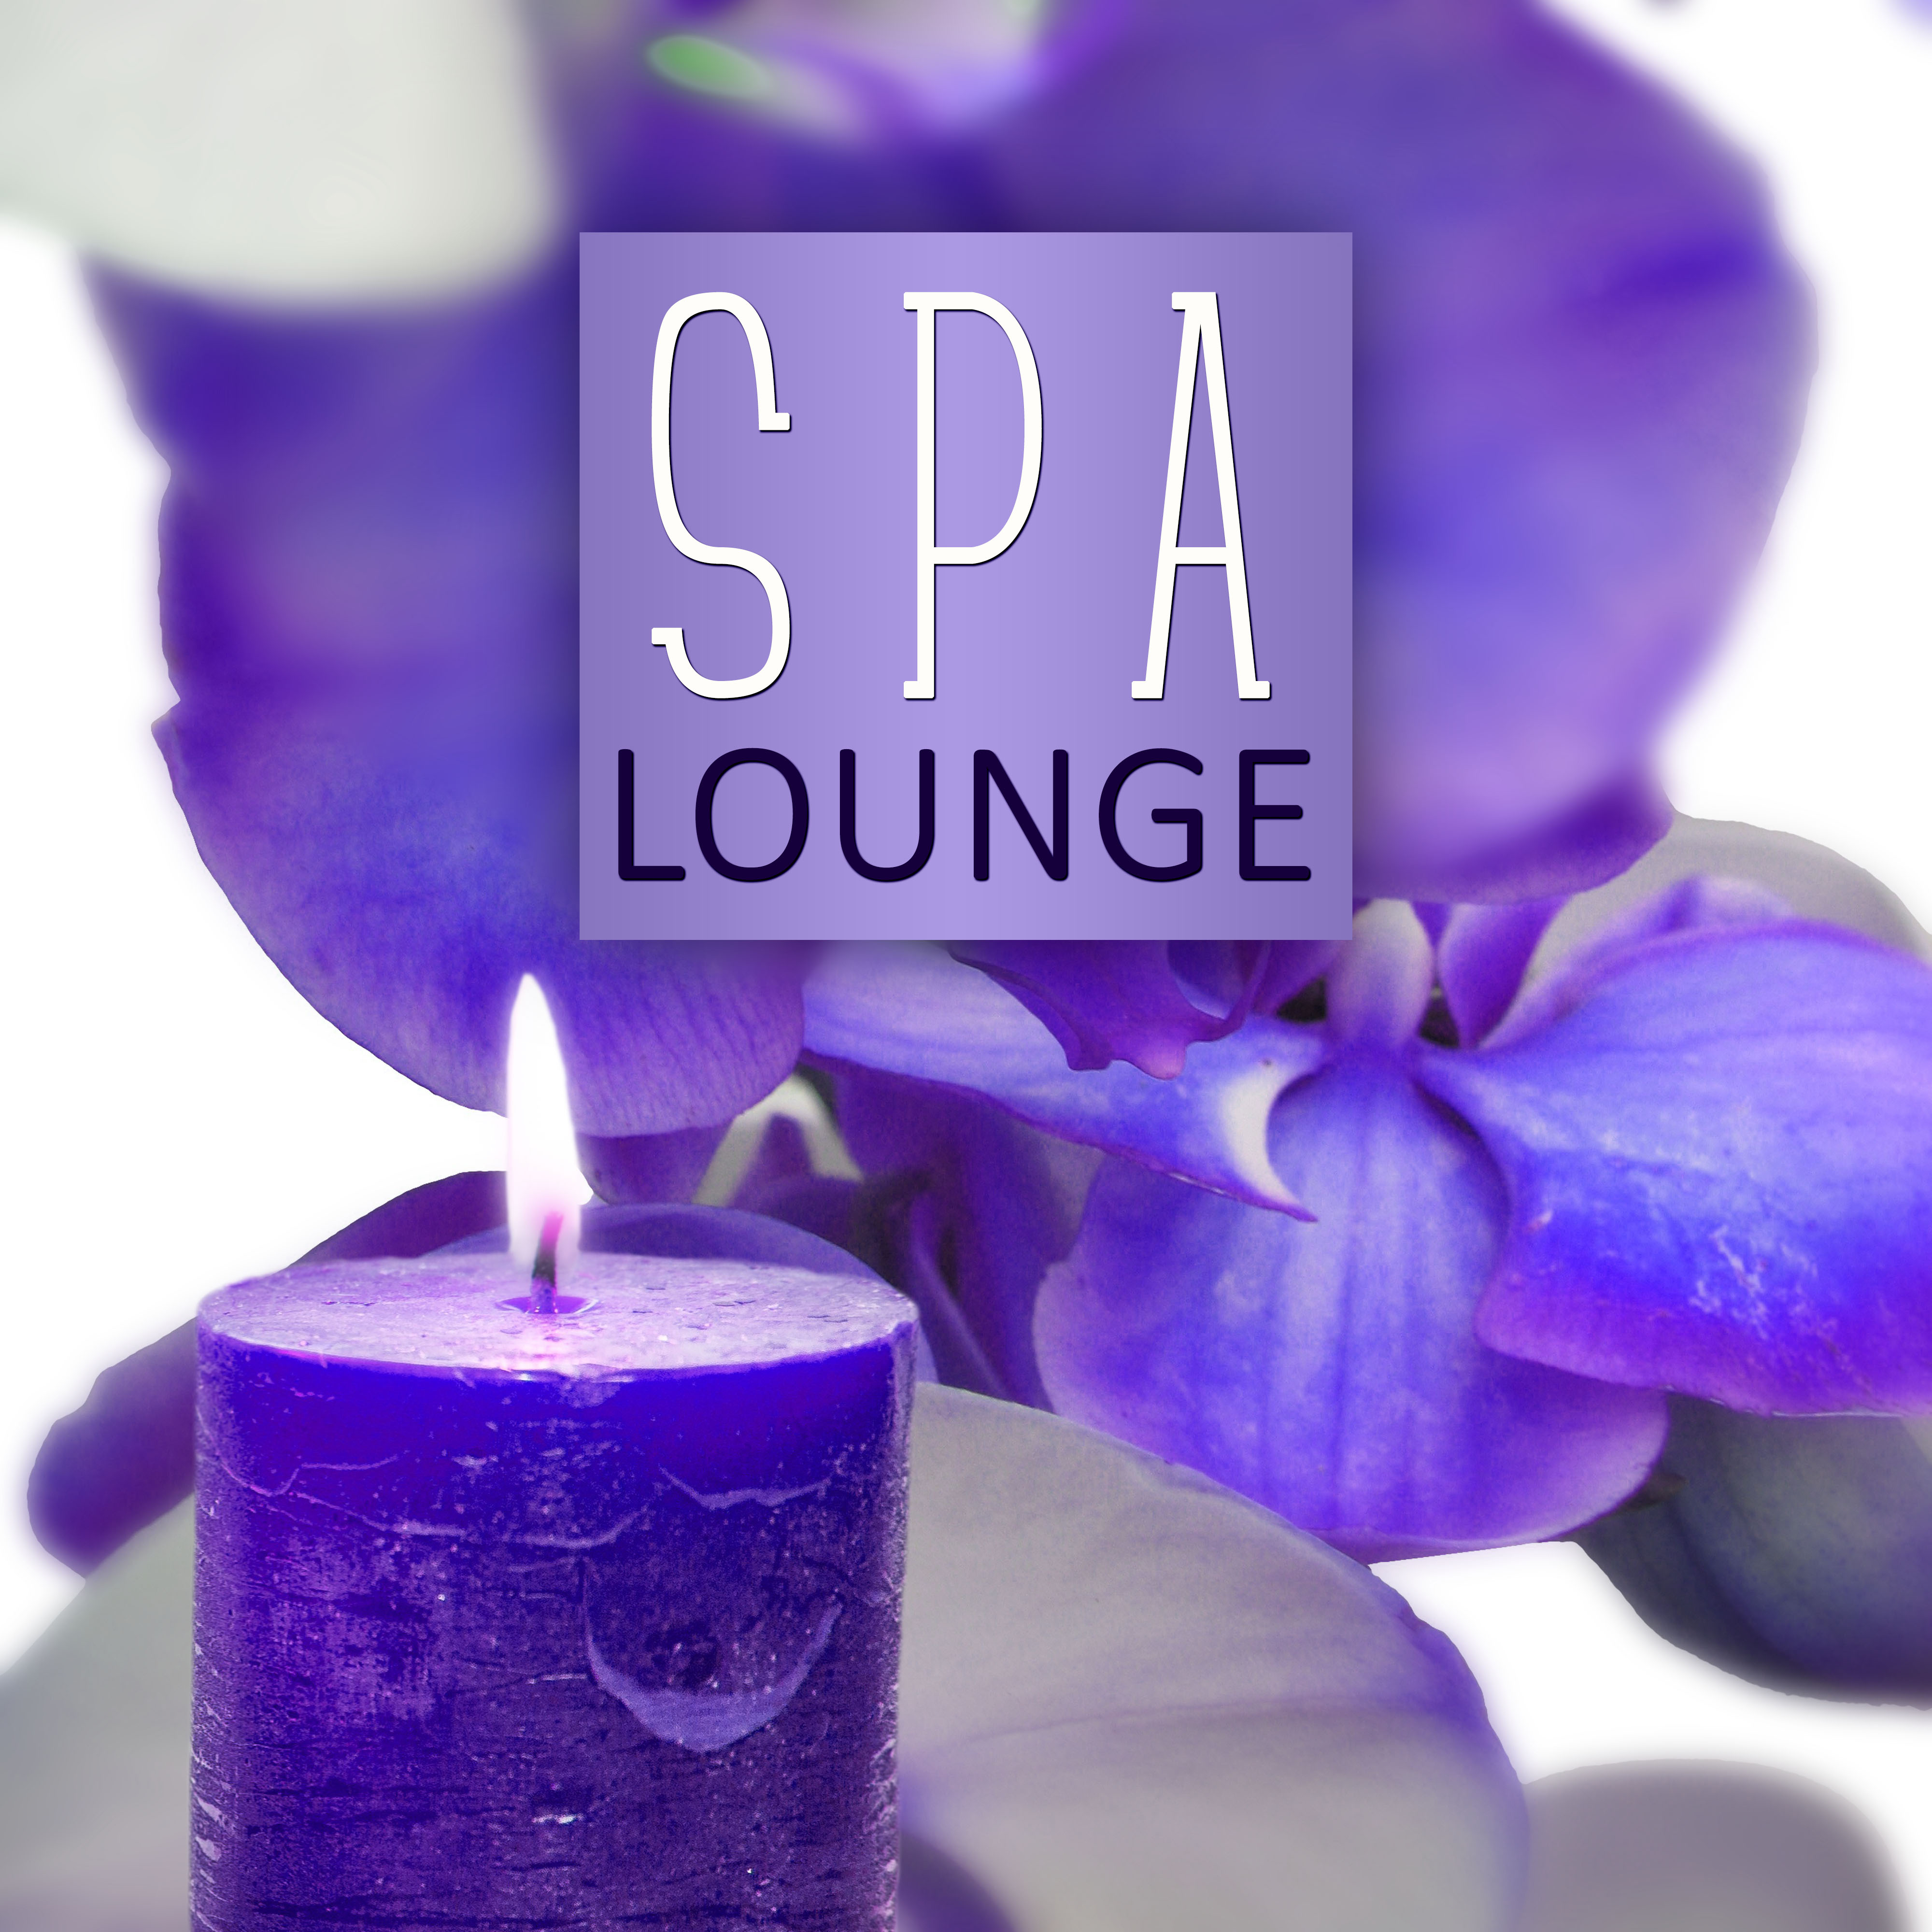 Spa Lounge  Relax In Free Time, Nature Sounds to Relax, Soothing Sounds of Nature, Music for Massage, Meditation